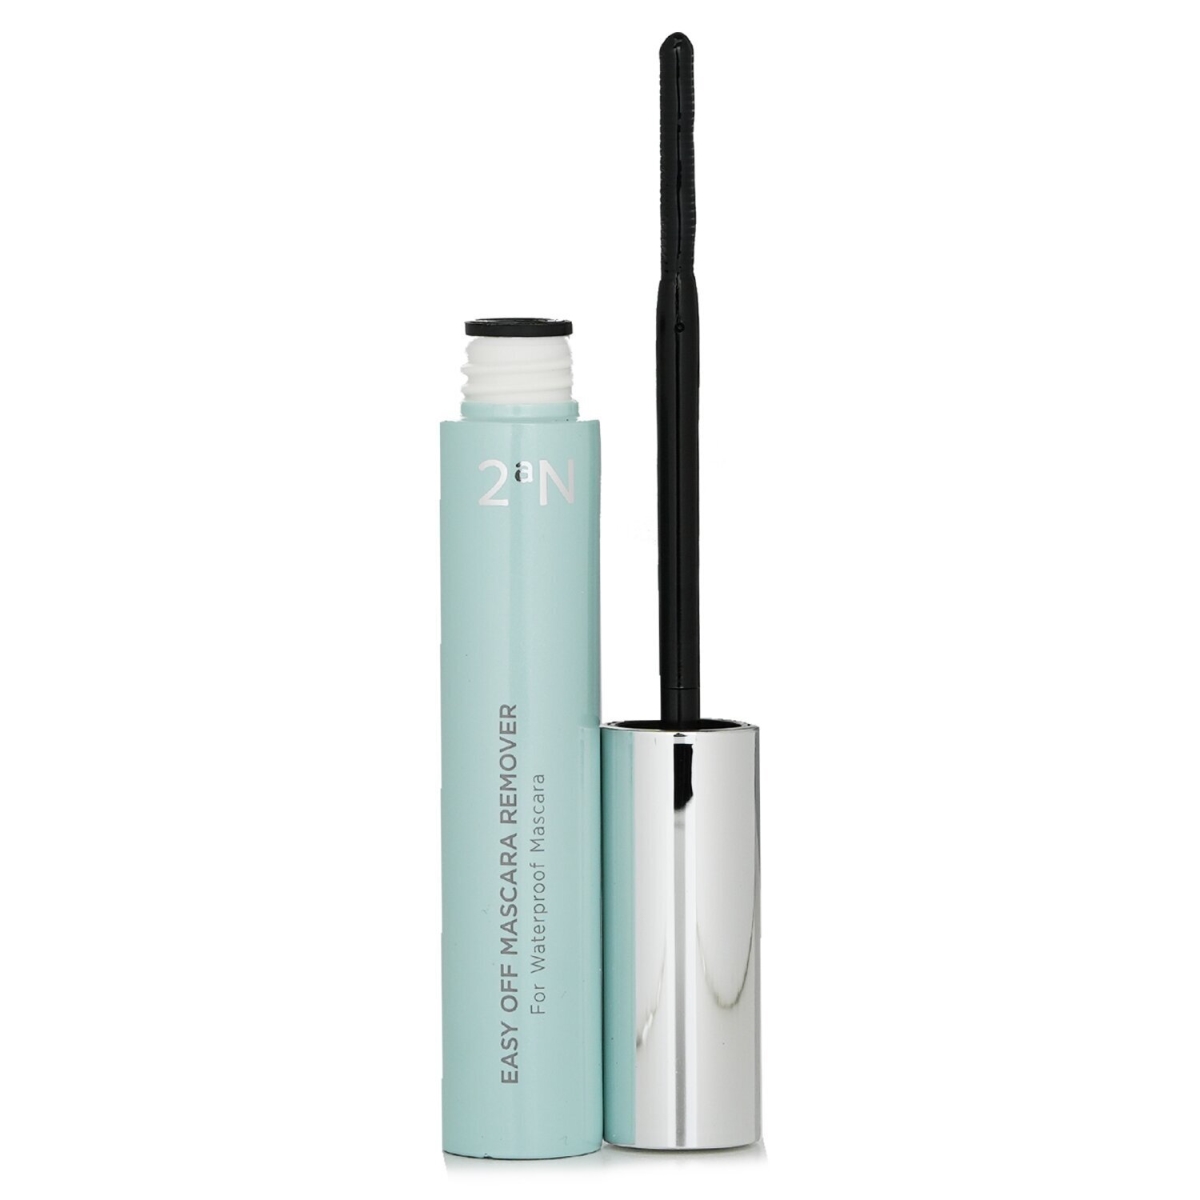 Picture of 2aN 295685 7 g Easy Off Mascara Remover for Waterproof Mascara